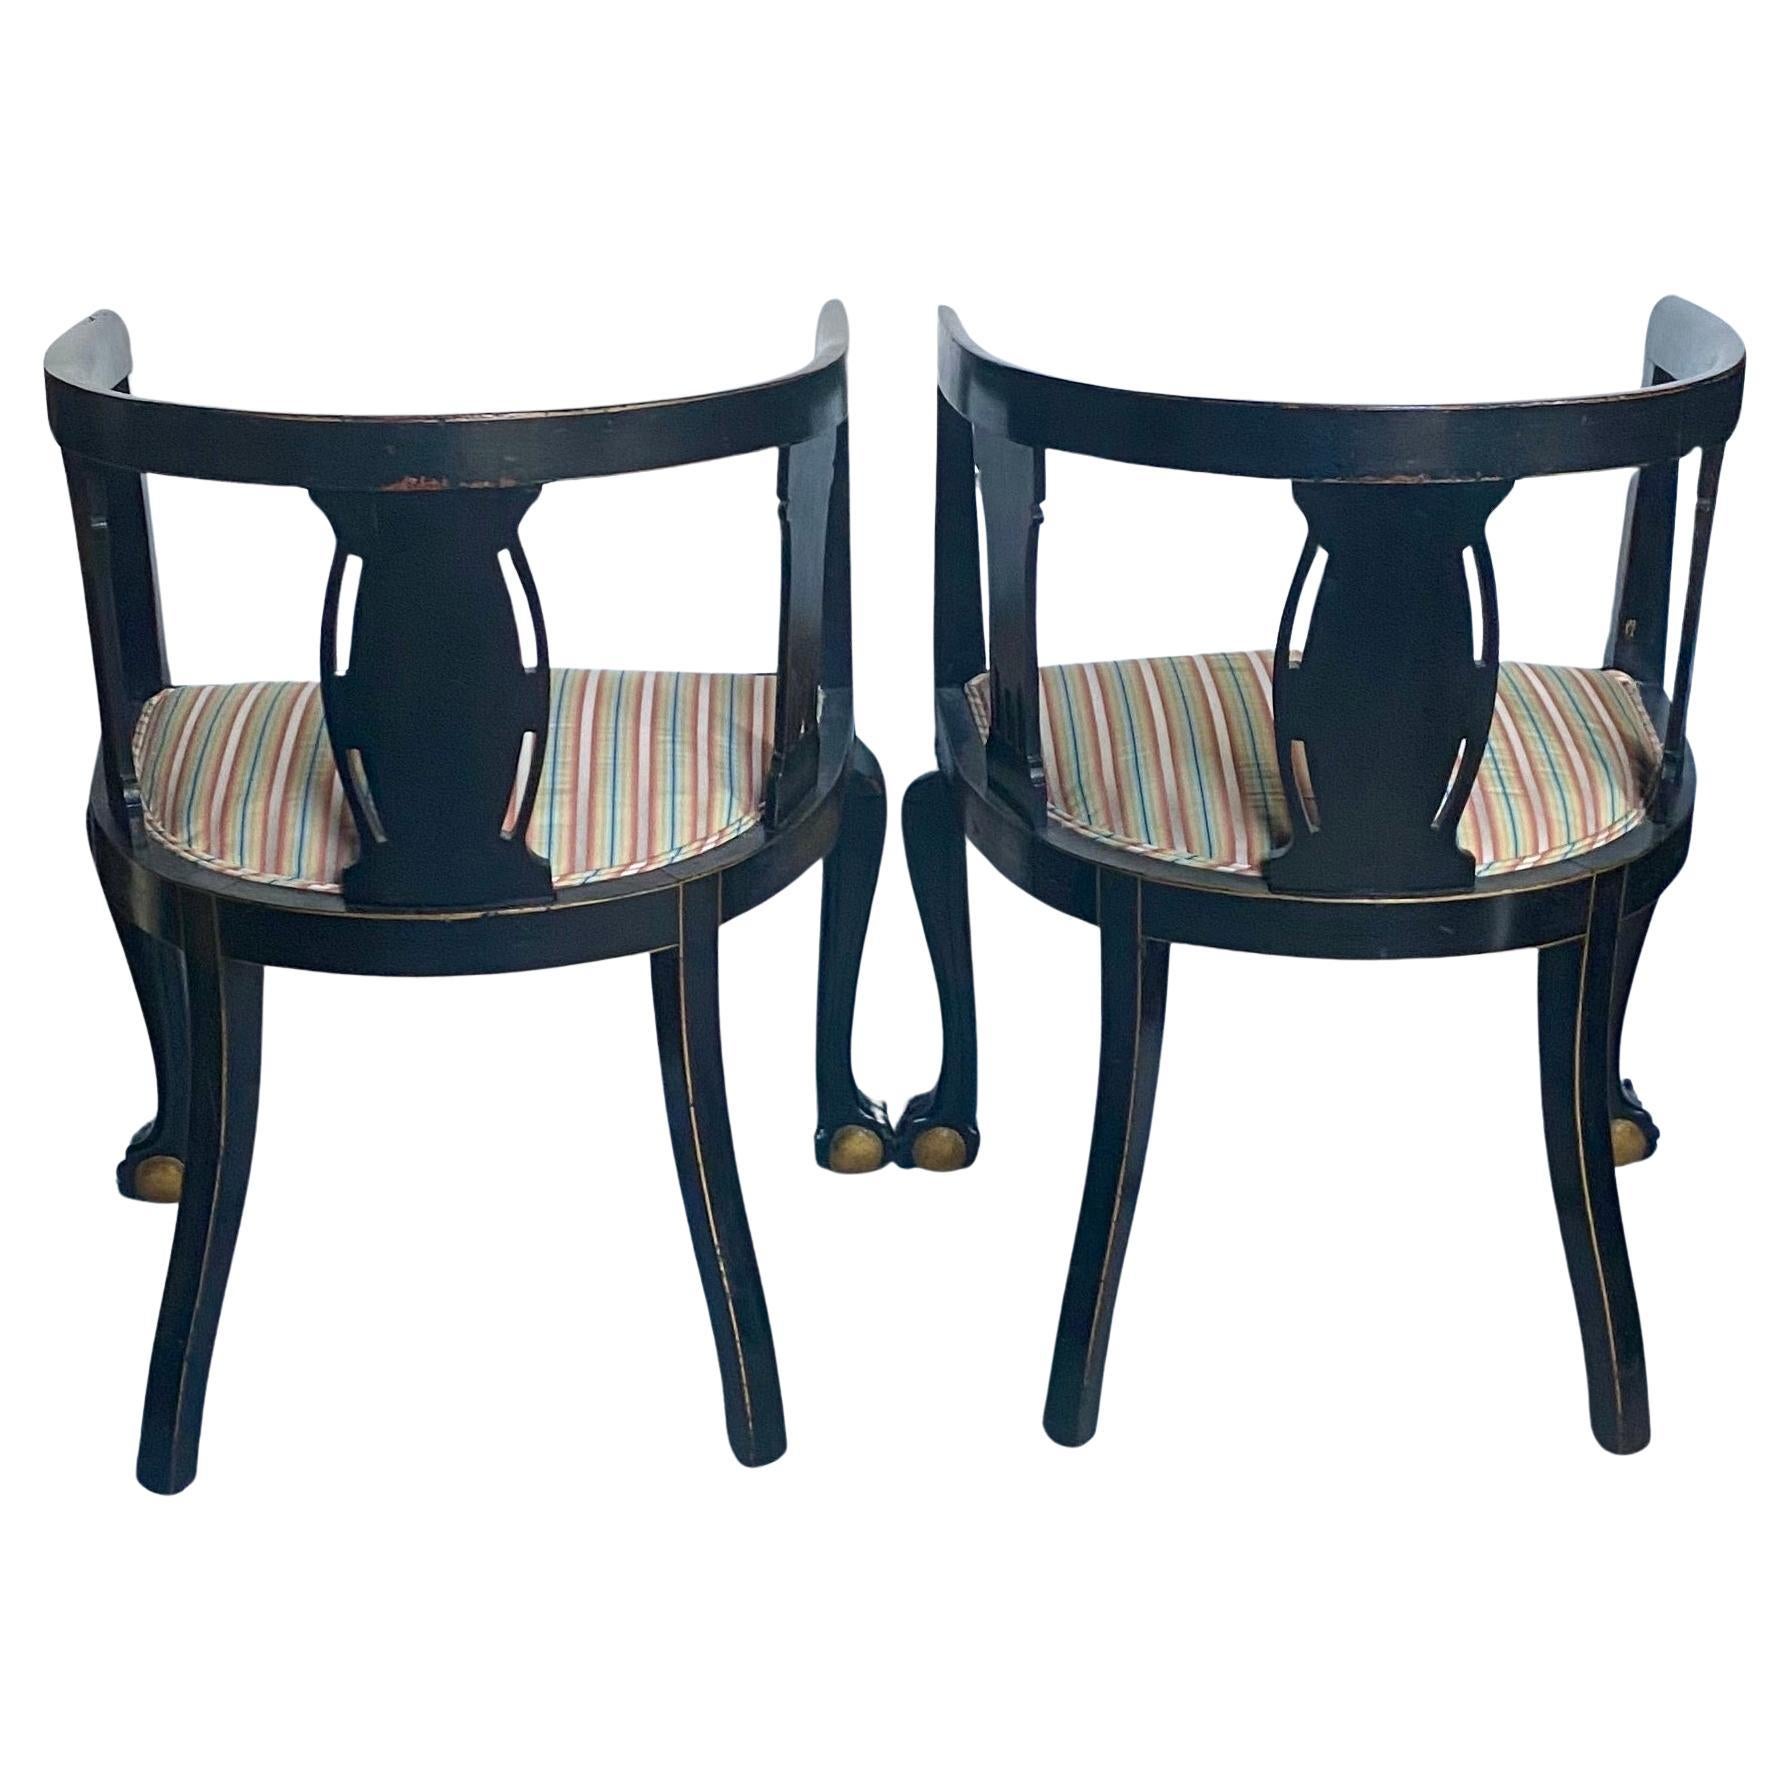 Upholstery Chinoiserie Ebonized Gilt Accent Clawfoot Tub Armchairs, Pair  For Sale